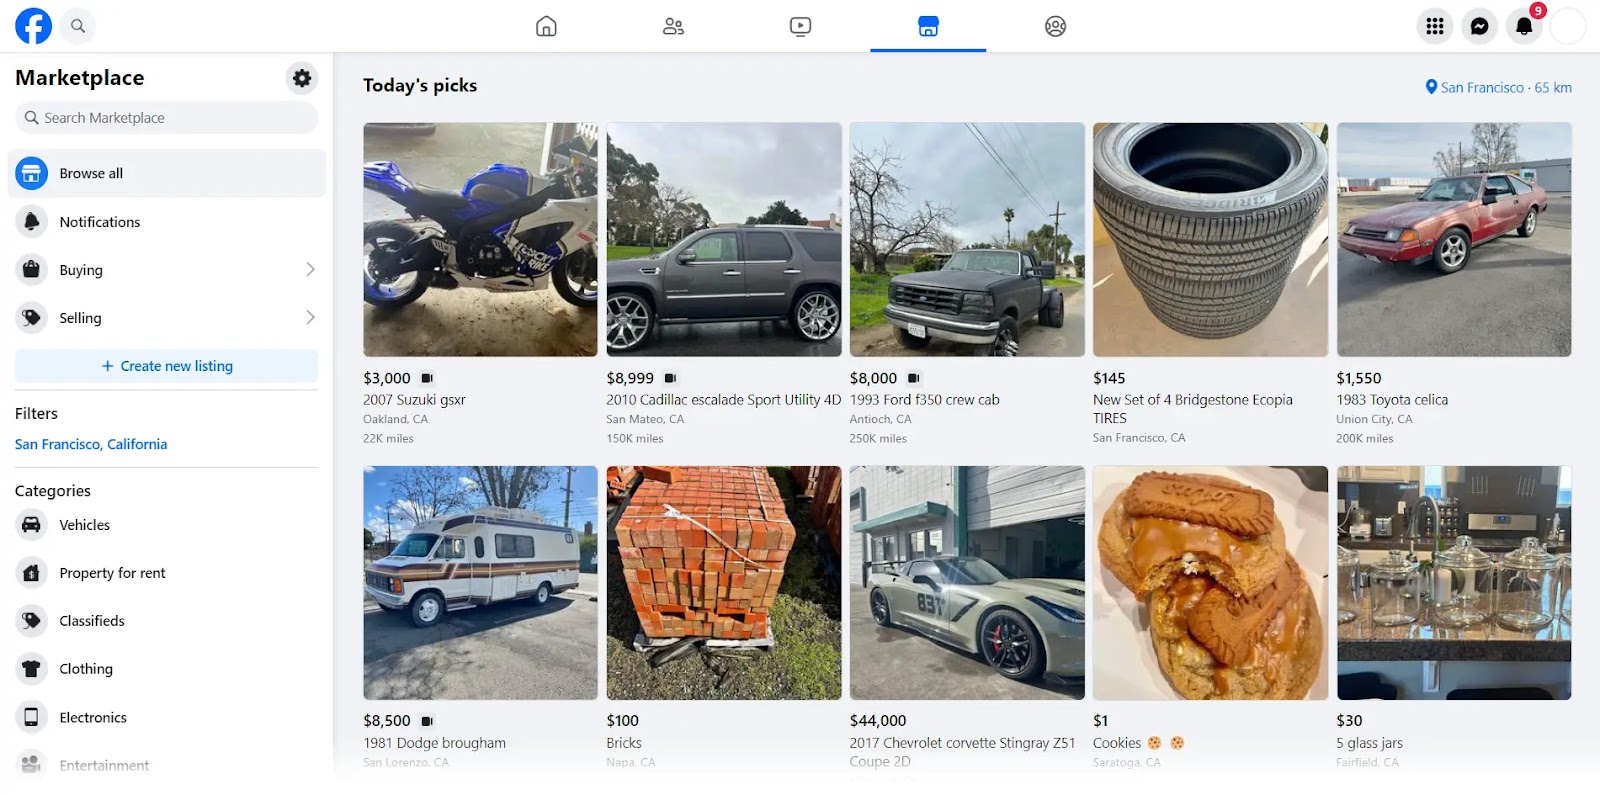 "Today's picks" section of Facebook Marketplace